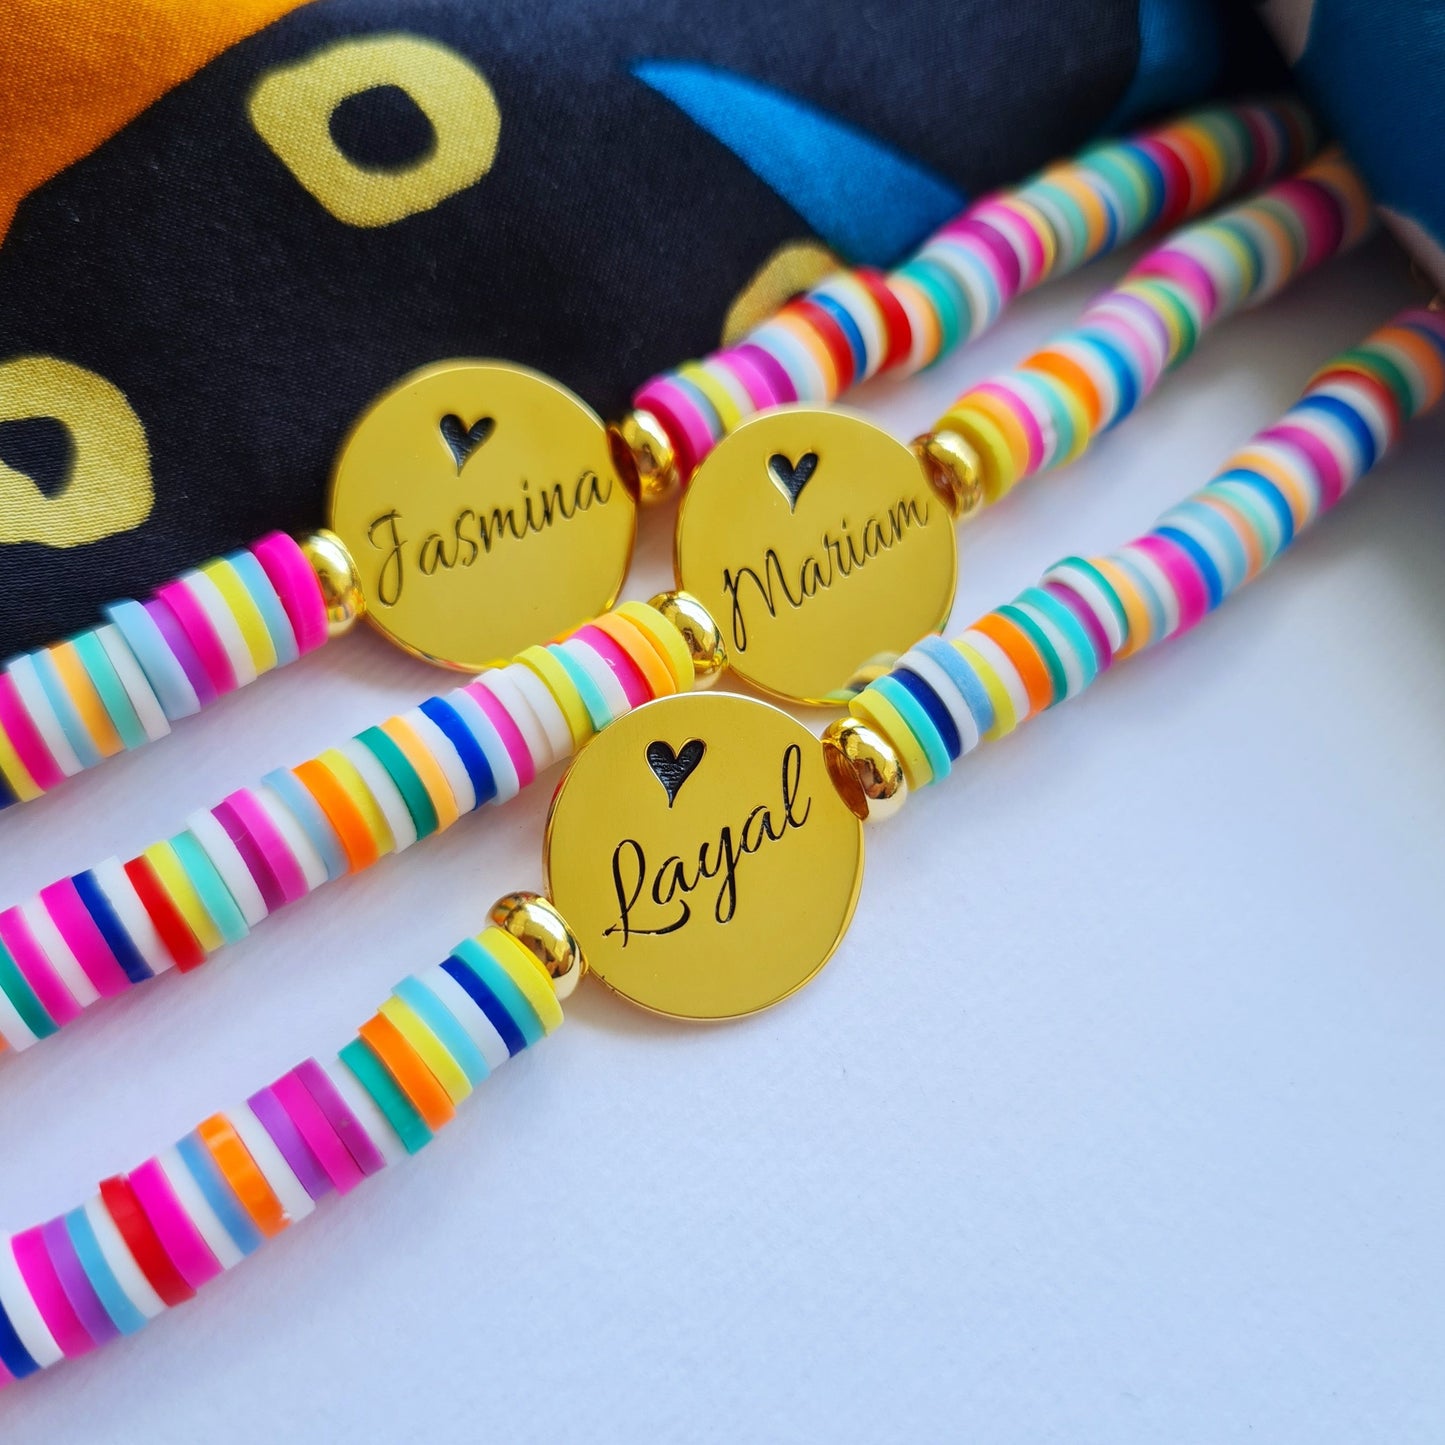 Clay Customizable "Name, drawing" bracelet